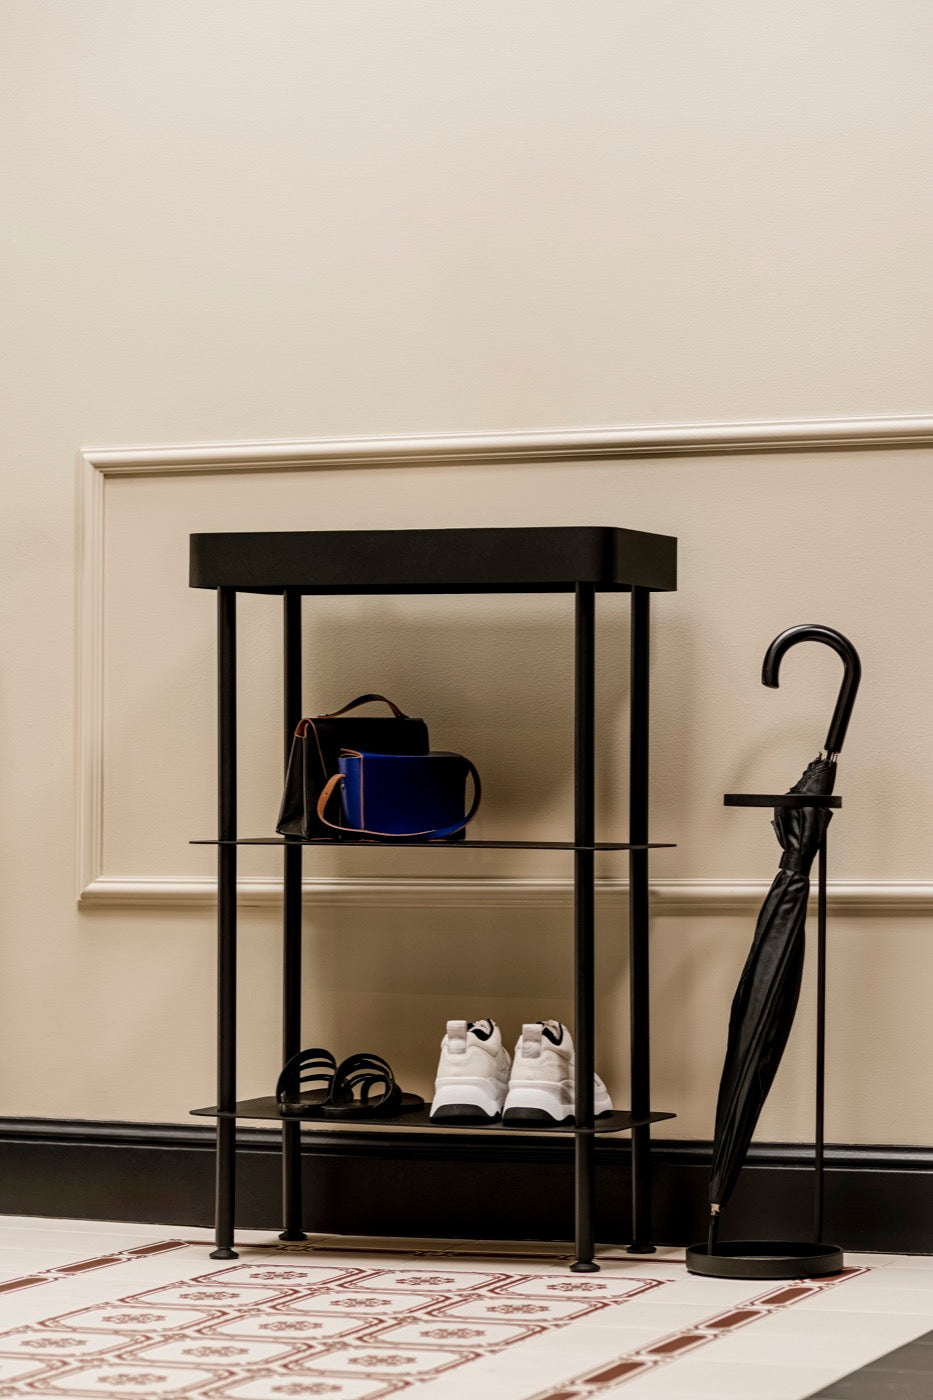 Don't let your hallway go unnoticed - make a statement with our collection of modern furniture. Browse coat racks, benches, poufs, stools, narrow sideboards, umbrella stands, and table consoles for small, japandi hallways. Entrance hall ideas.